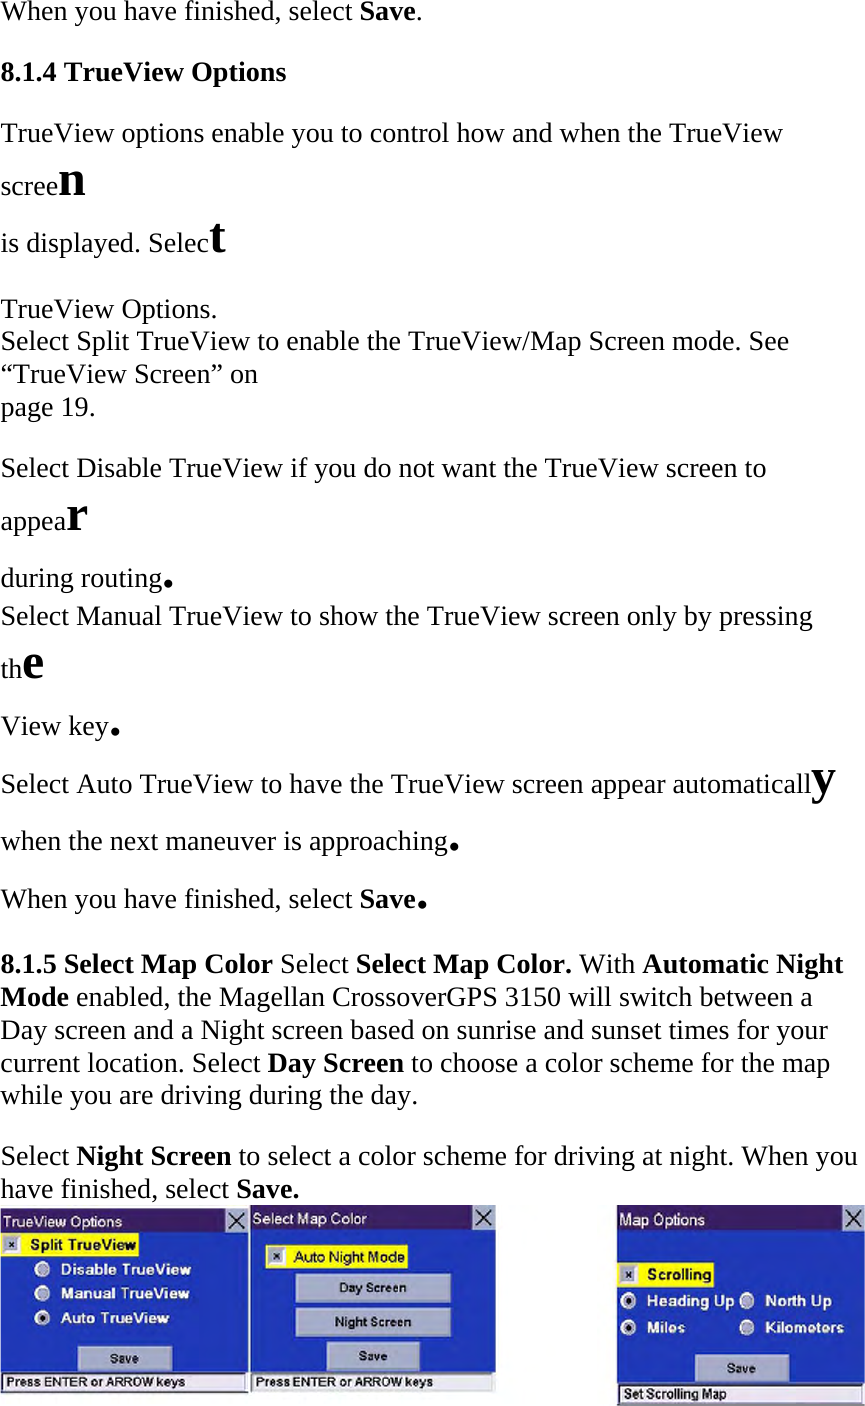 When you have finished, select Save.  8.1.4 TrueView Options  TrueView options enable you to control how and when the TrueView screen  is displayed. Select  TrueView Options.  Select Split TrueView to enable the TrueView/Map Screen mode. See  “TrueView Screen” on  page 19.  Select Disable TrueView if you do not want the TrueView screen to appear  during routing.  Select Manual TrueView to show the TrueView screen only by pressing the  View key.  Select Auto TrueView to have the TrueView screen appear automatically  when the next maneuver is approaching.  When you have finished, select Save.  8.1.5 Select Map Color Select Select Map Color. With Automatic Night Mode enabled, the Magellan CrossoverGPS 3150 will switch between a Day screen and a Night screen based on sunrise and sunset times for your current location. Select Day Screen to choose a color scheme for the map while you are driving during the day.  Select Night Screen to select a color scheme for driving at night. When you have finished, select Save.   